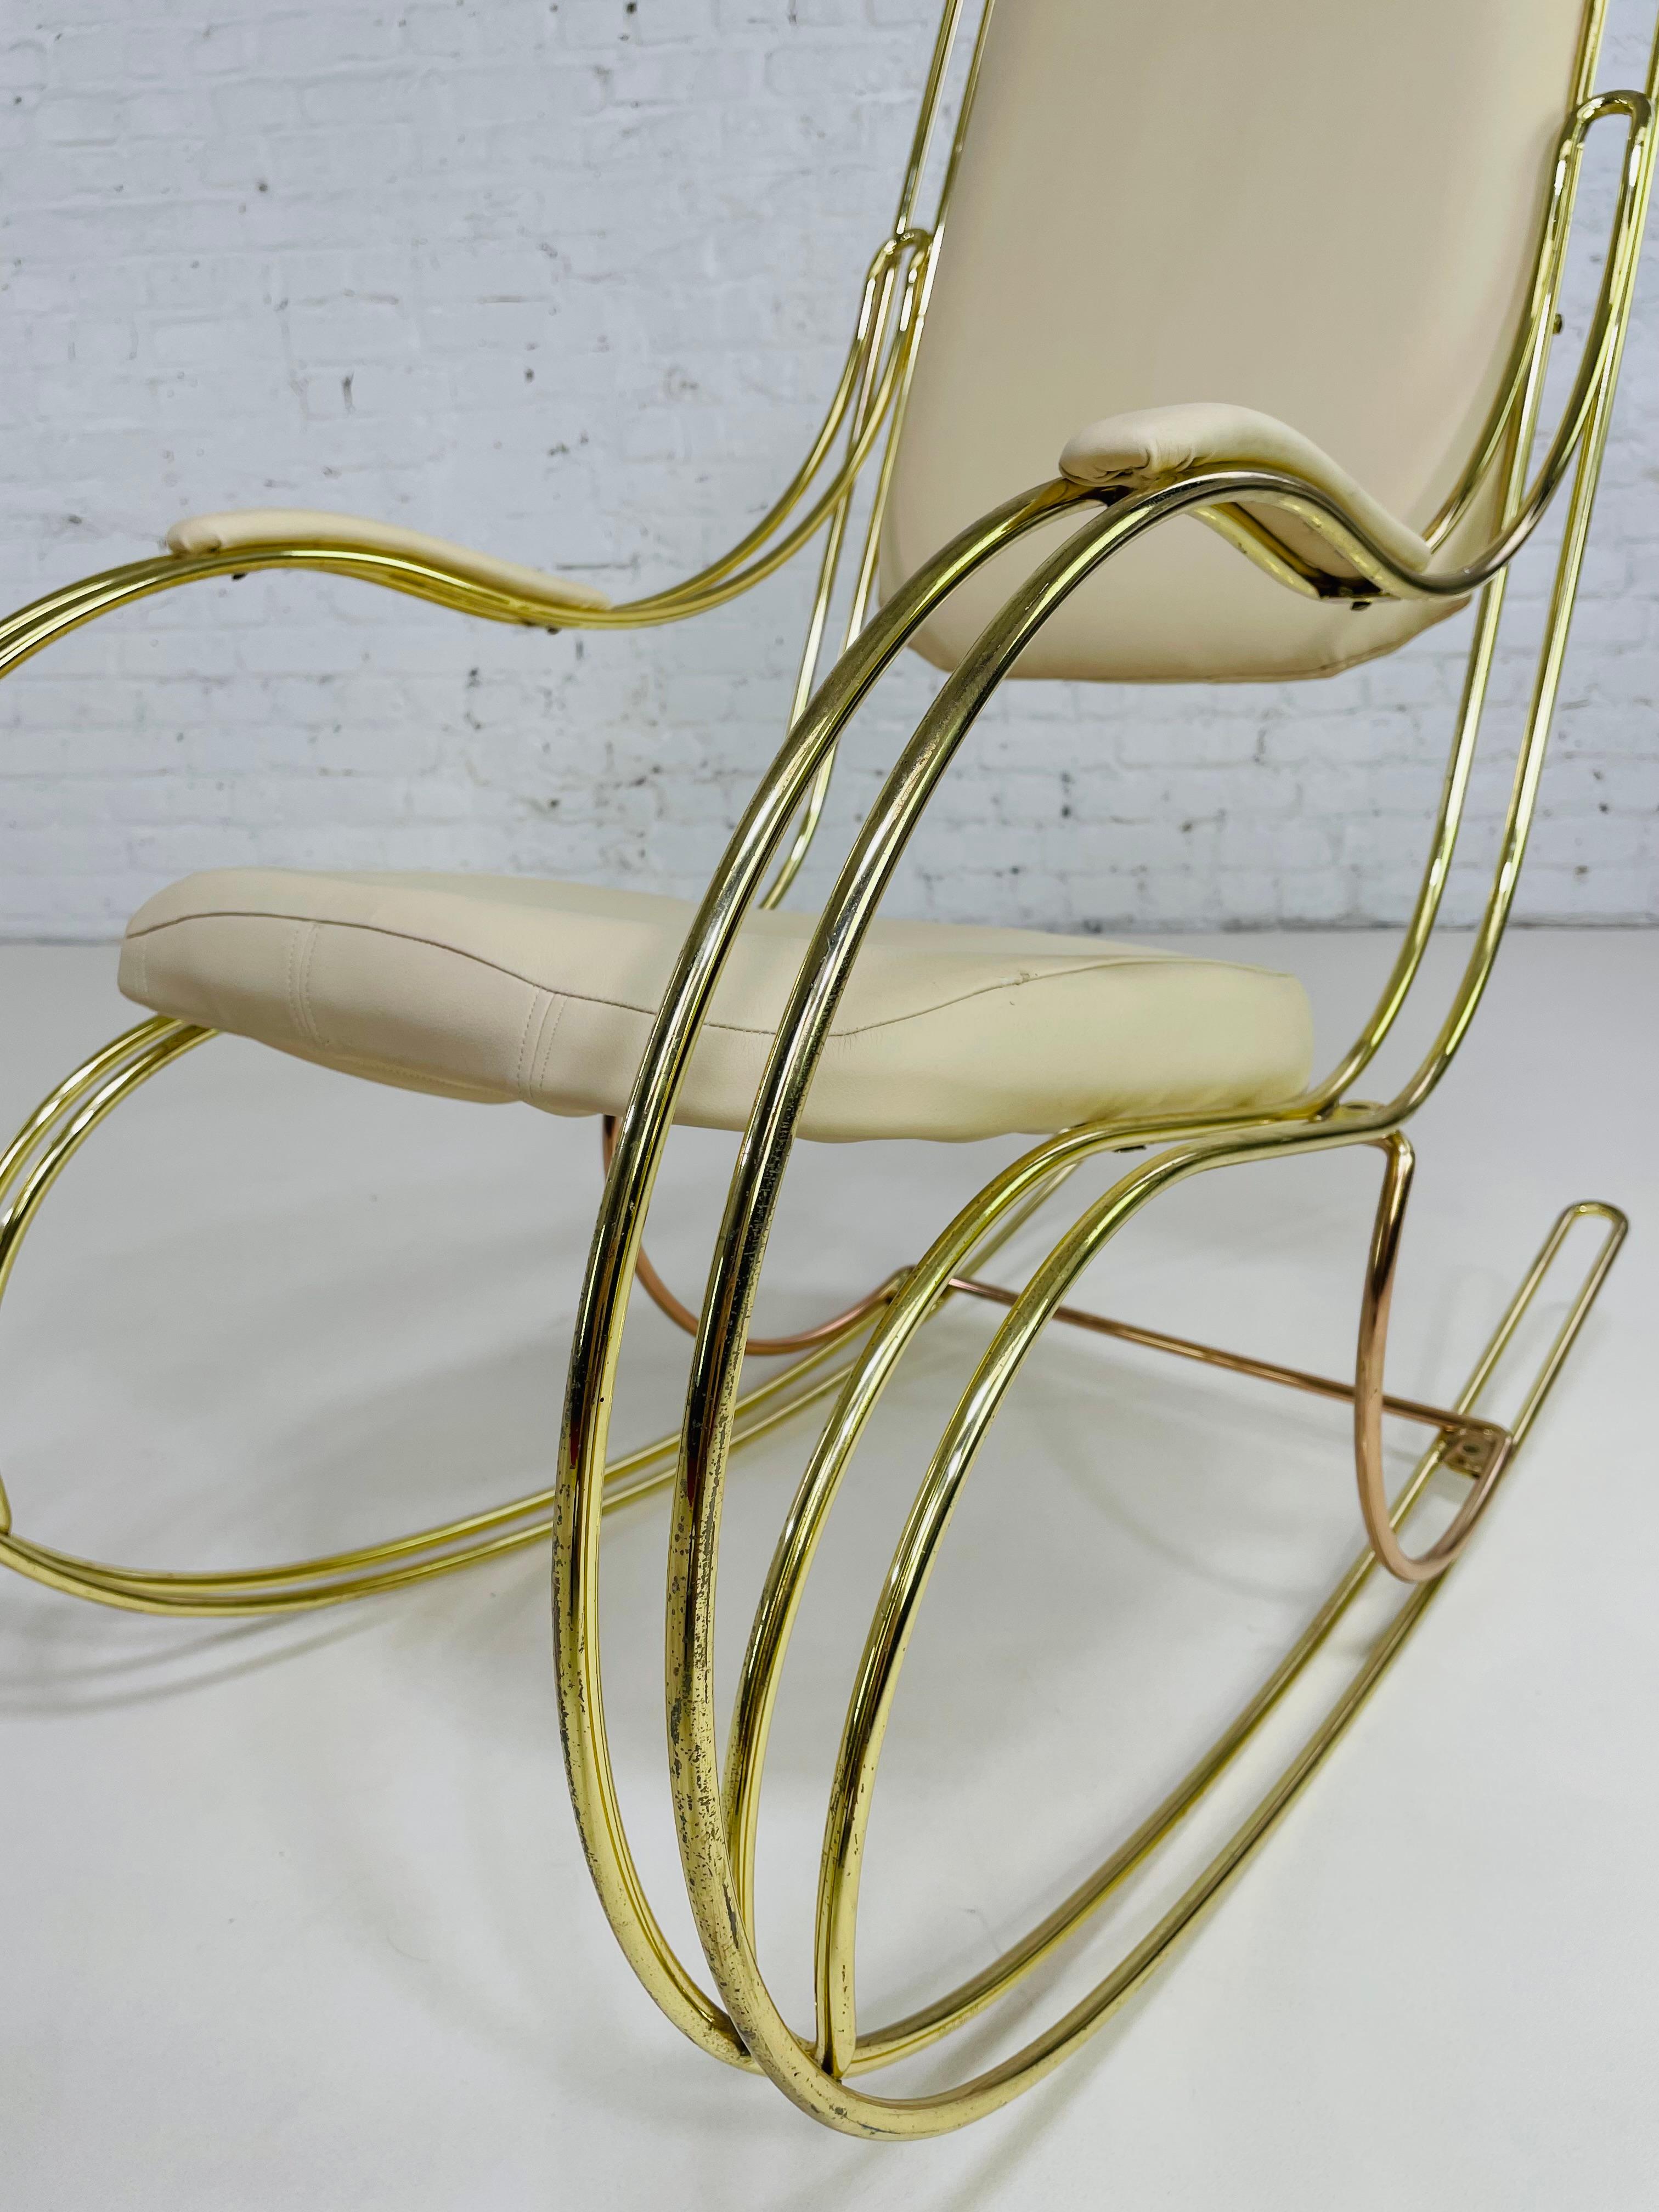 1960s-1970s Brass And Beige Faux Leather Rocking Chair For Sale 9